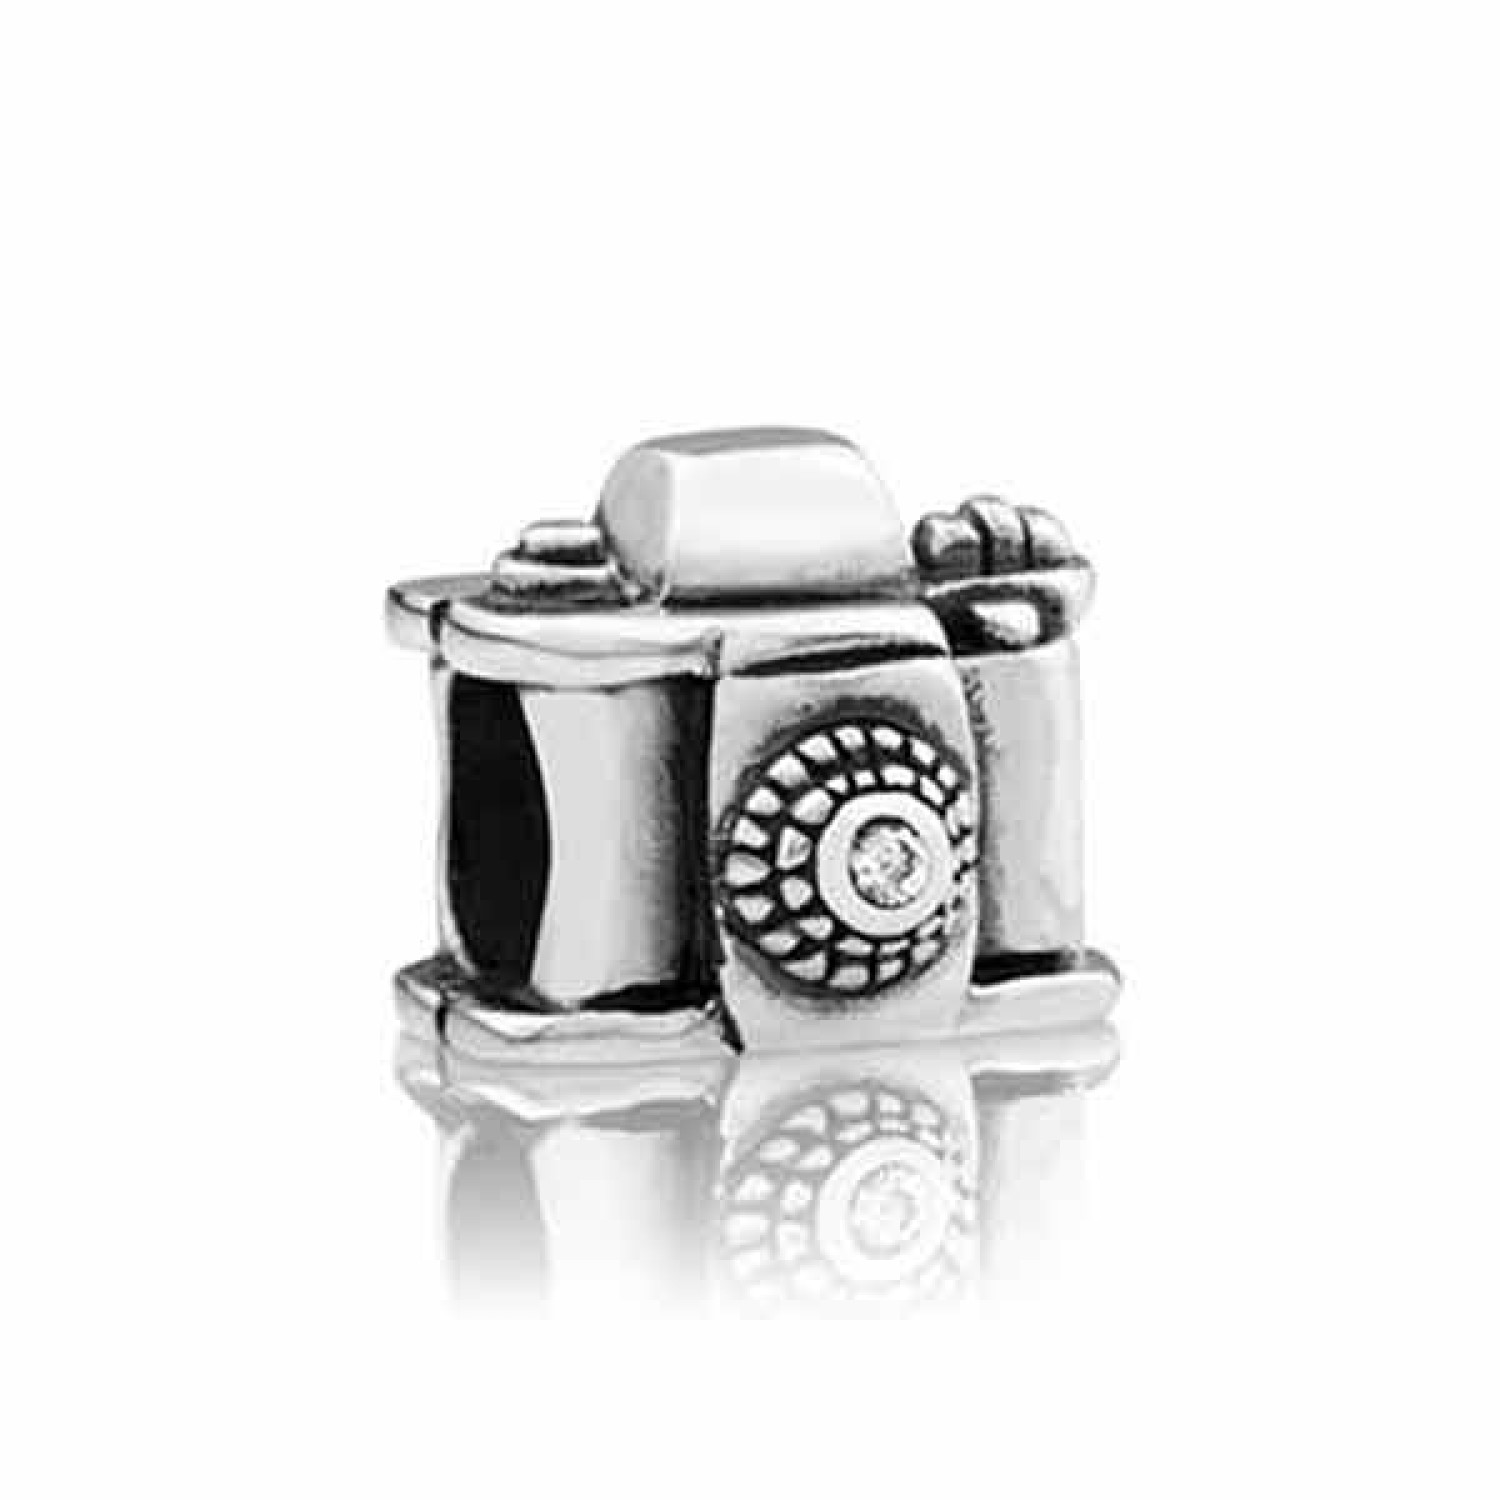 LK185CZ Evolve Charm Camera. 3 Months No Payments and Interest for Q Card holders.  A picture paints a thousand words, connecting us with the people and places we care about most. This cute camera with its sparkling white cubic zirconia lens wi @christies